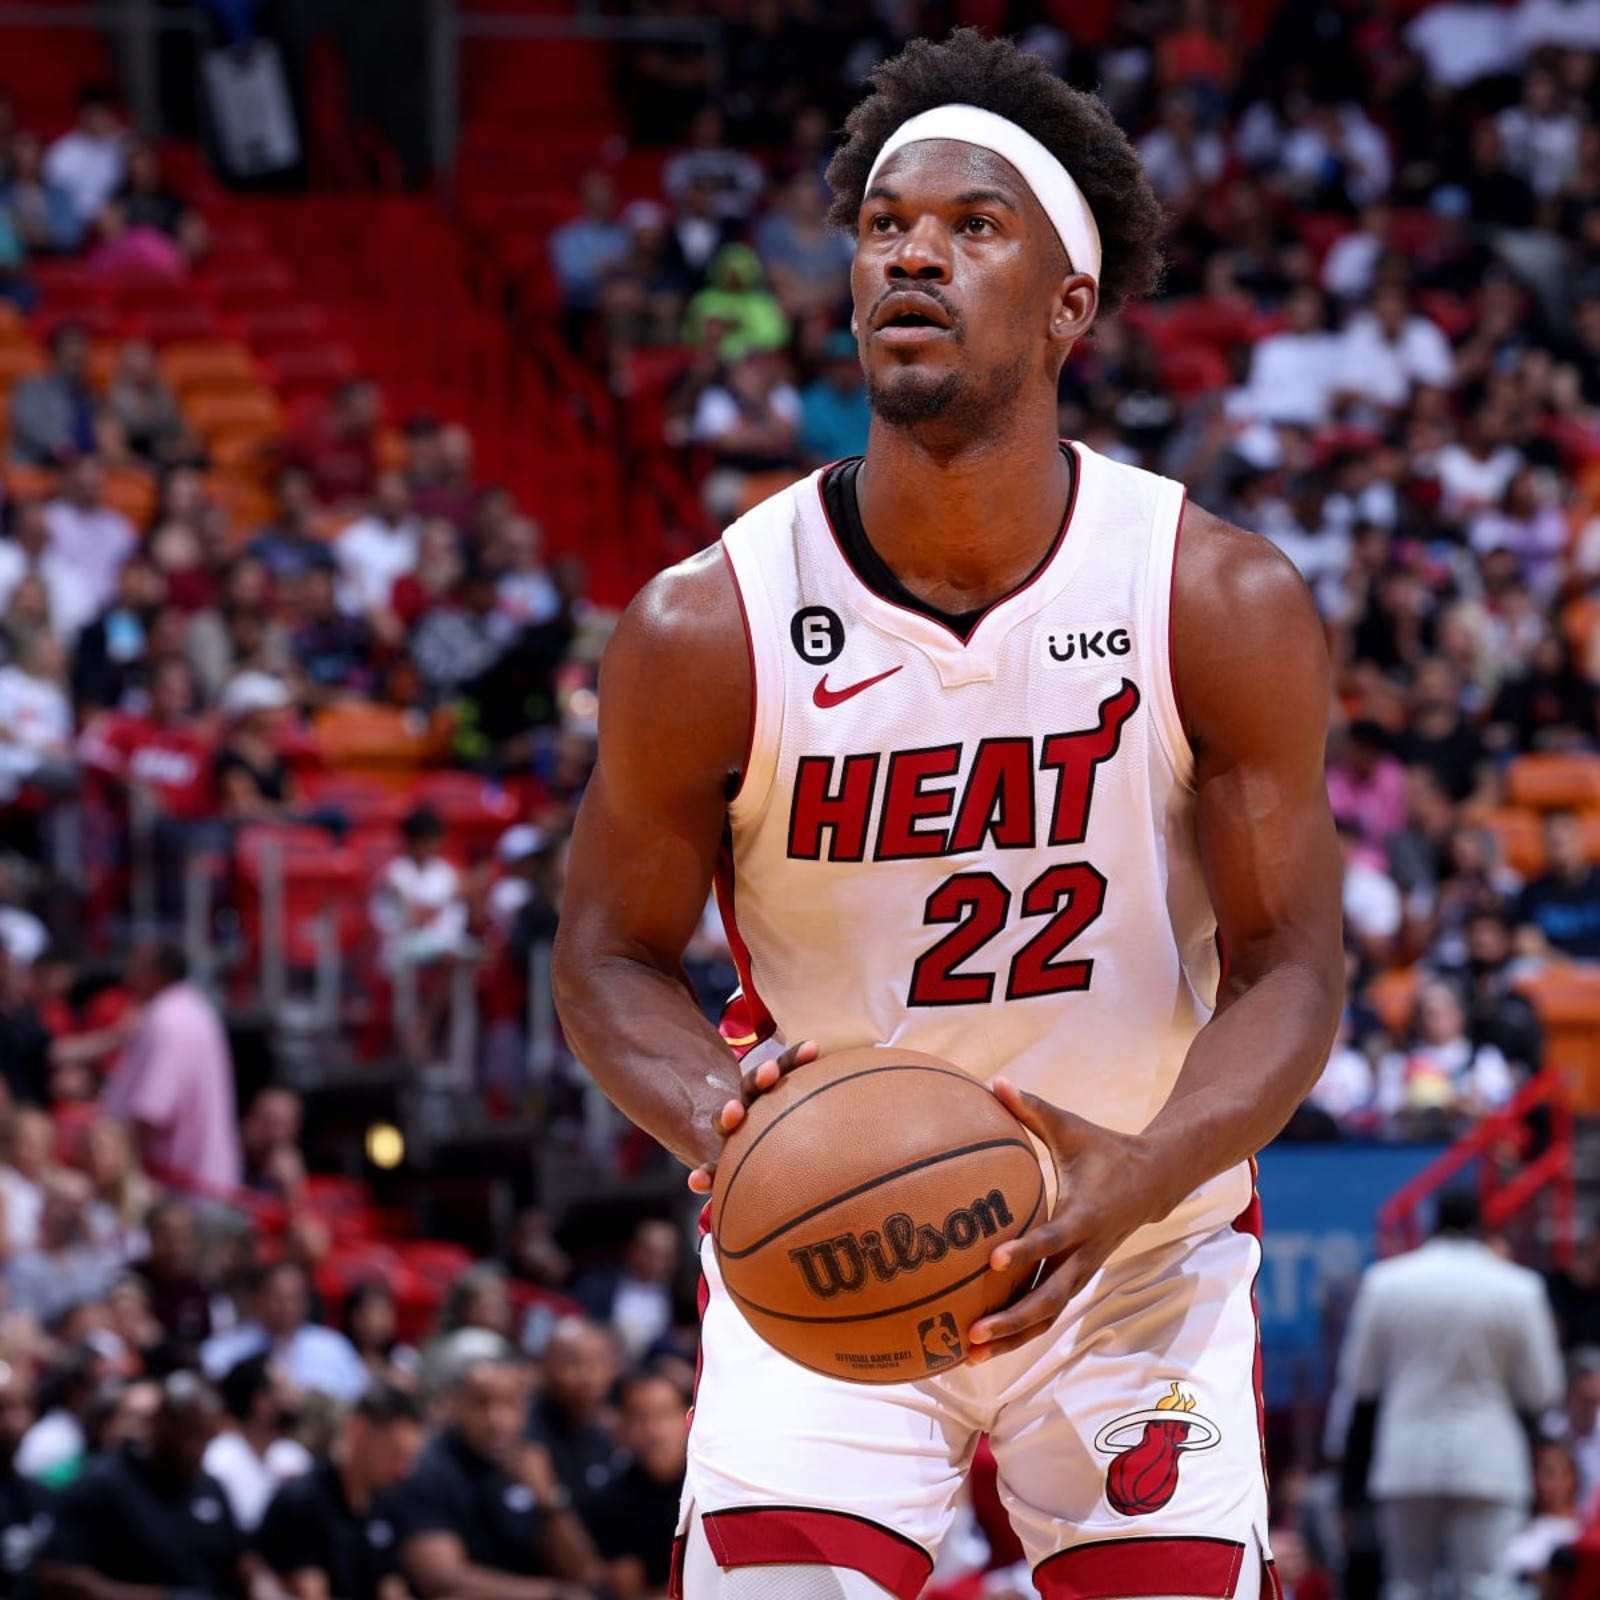 Miami Heat LeBron James 49 points, Jimmy Butler 56 points and